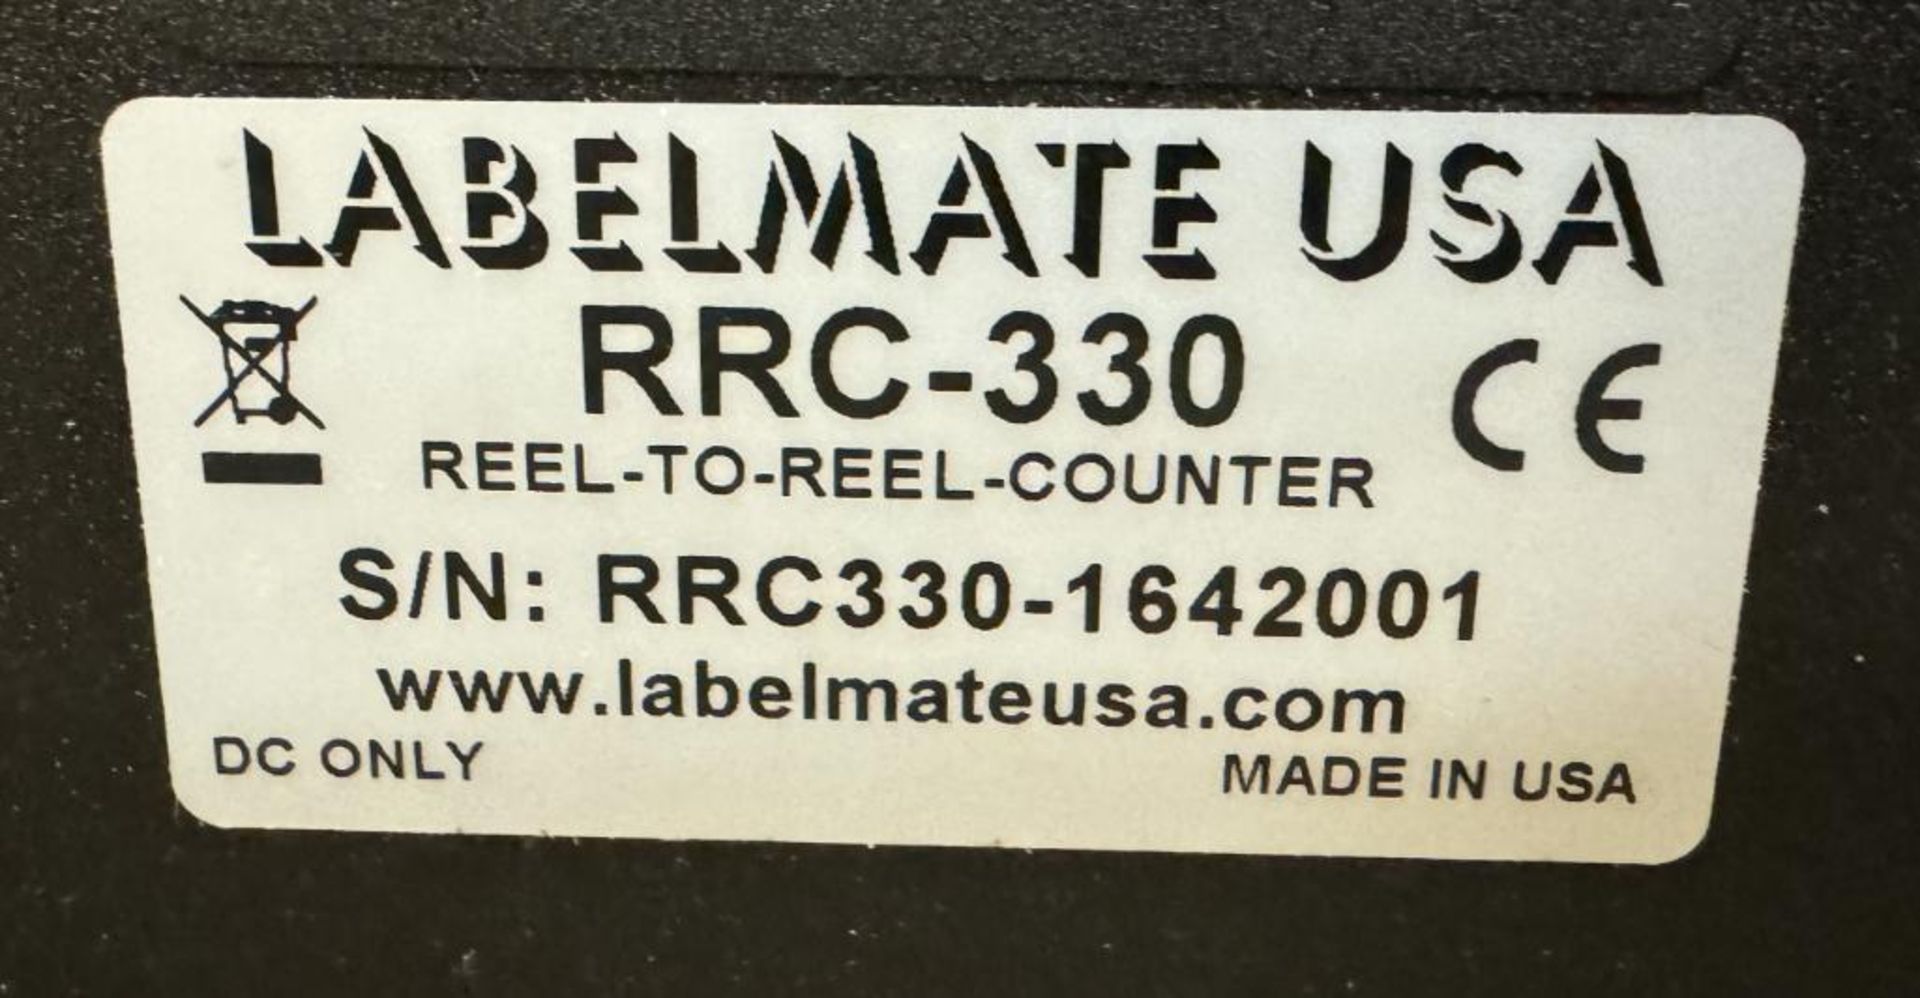 Lot Consisting Of: (1) Zebra ZT410 Printer, (2) Labelmate RRC-330 Reel To Reel Counters. - Image 8 of 8